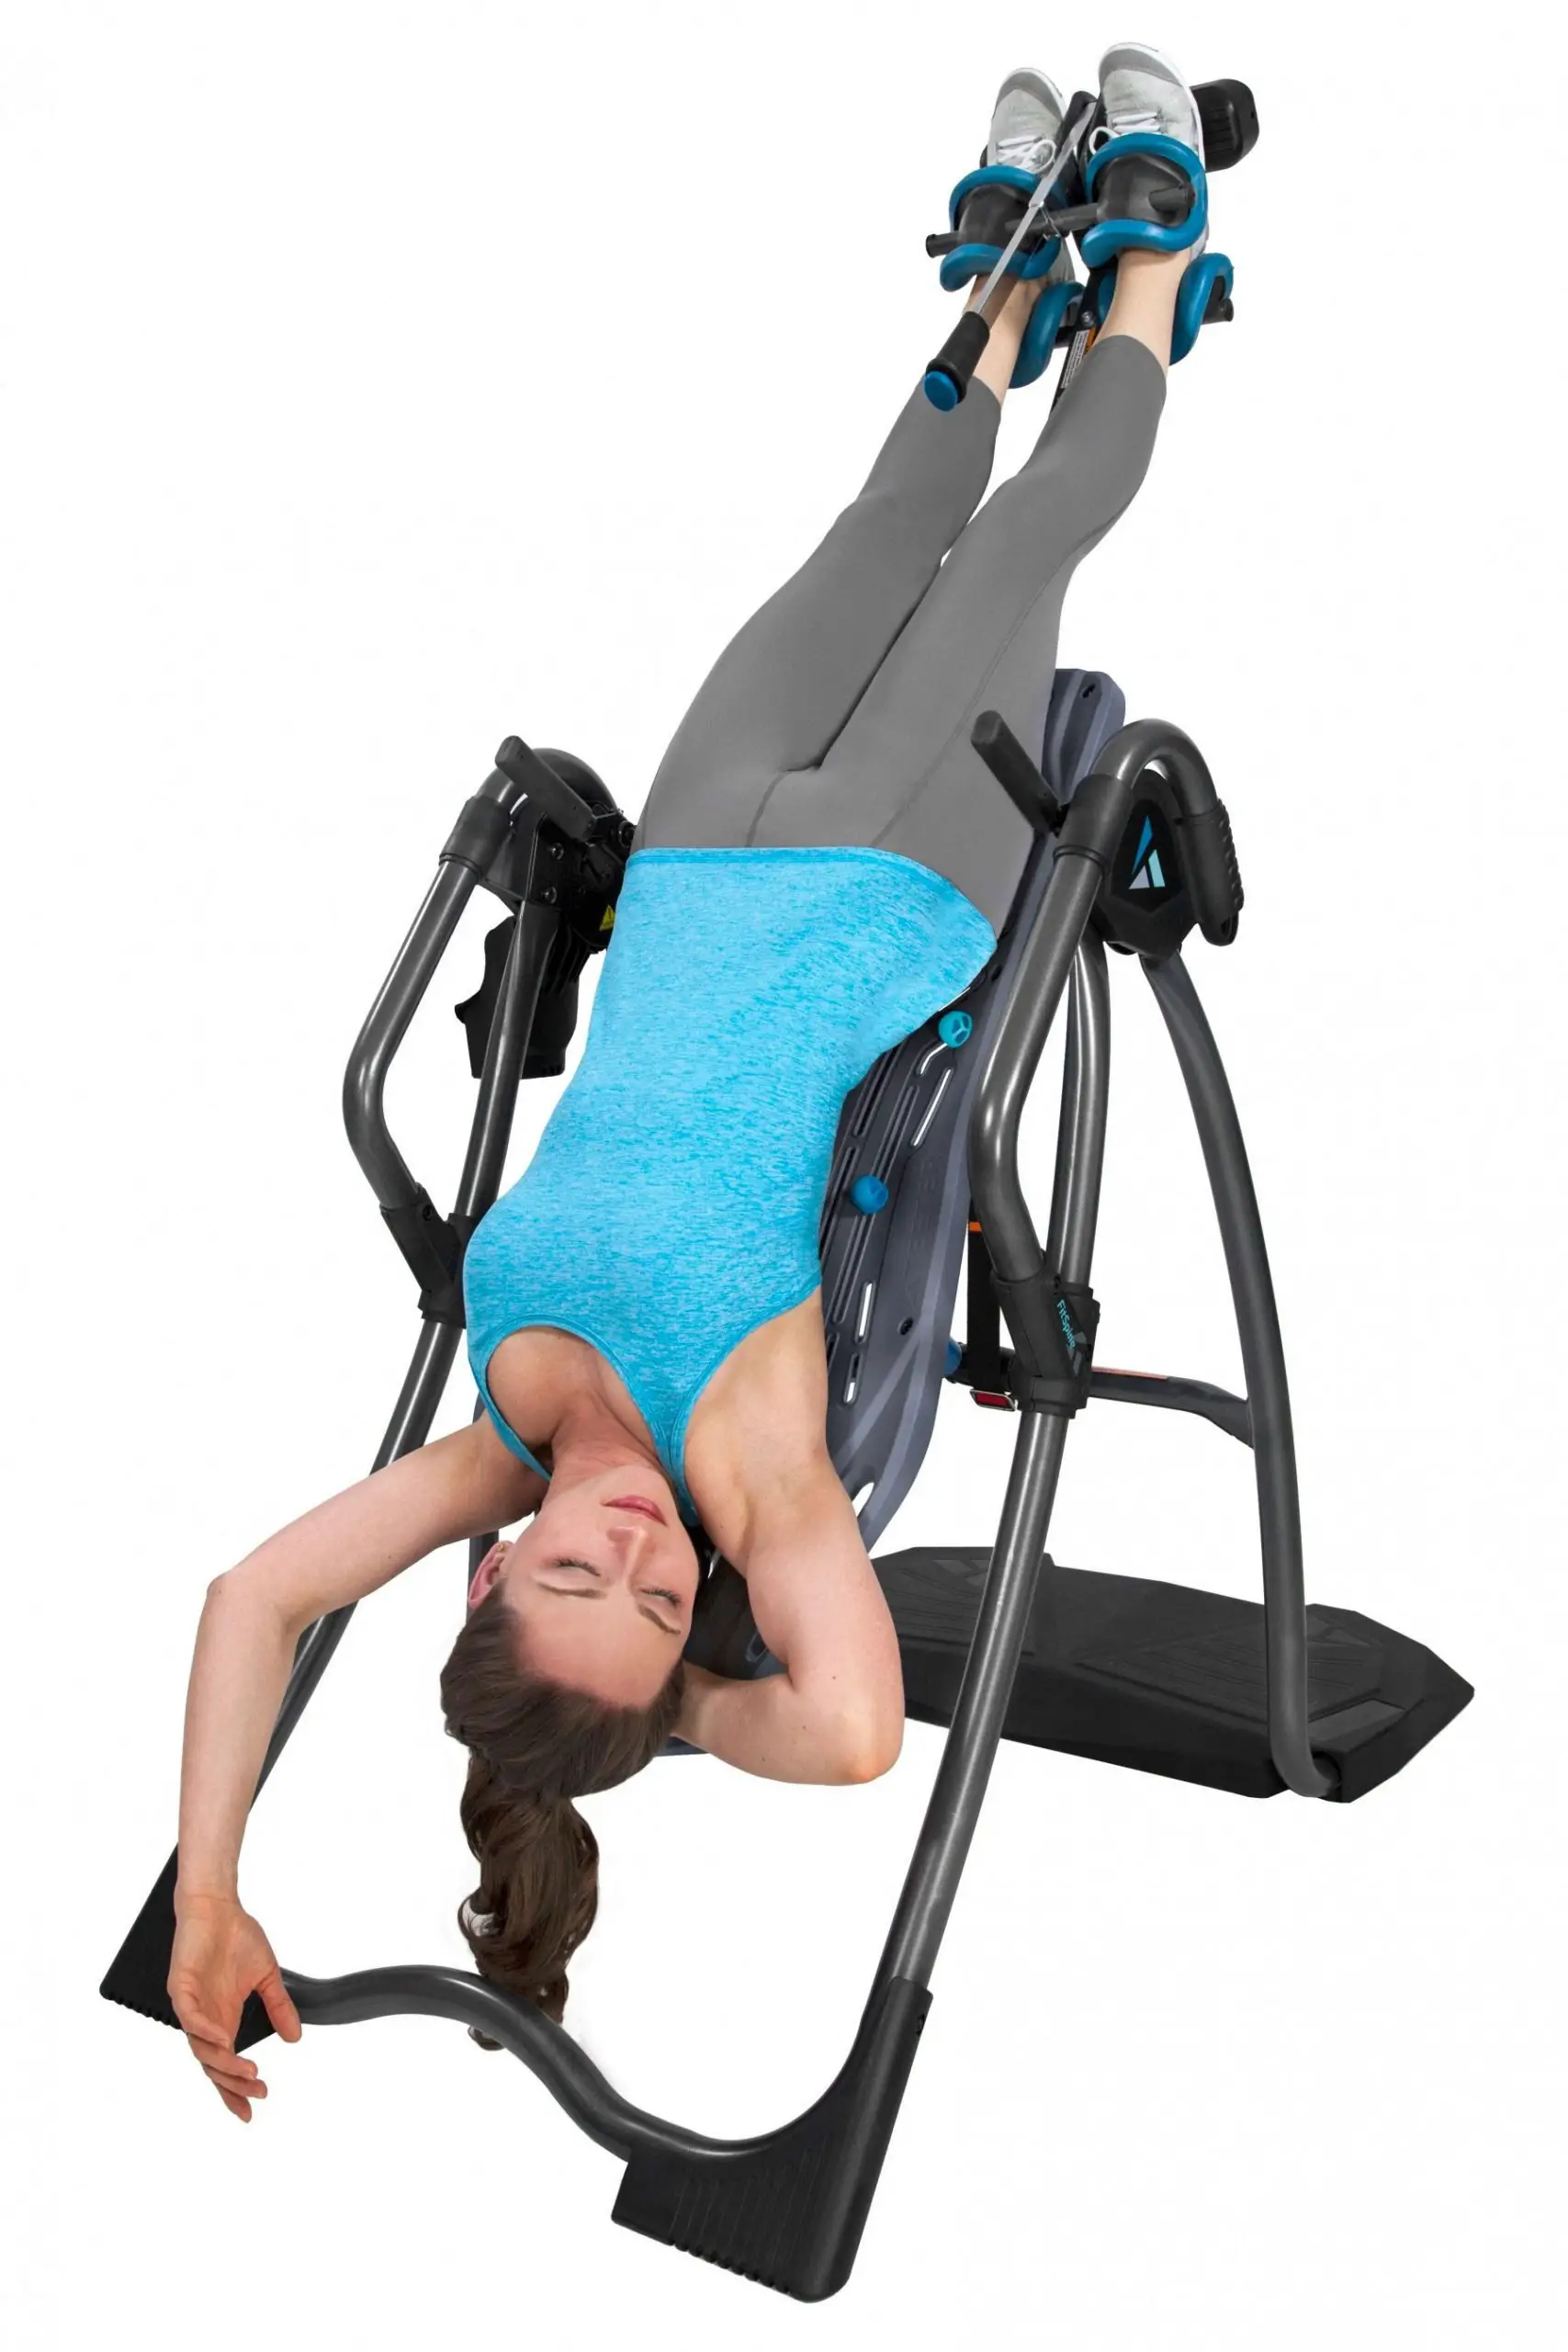 If I Have Back Pain, Should I Use an Inversion Table?